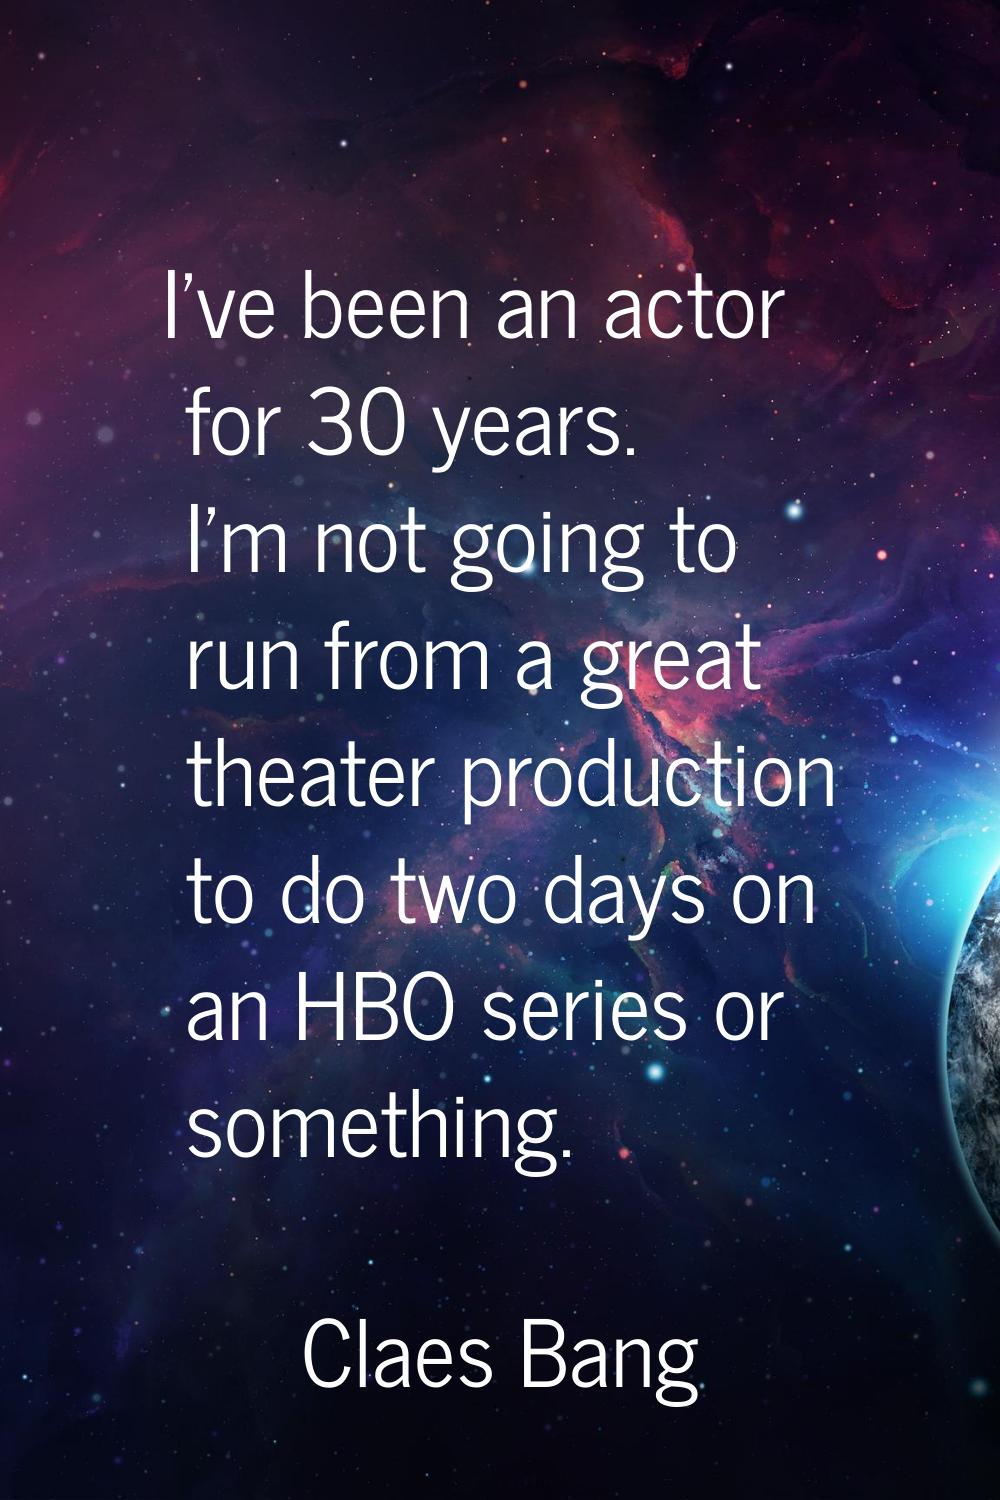 I've been an actor for 30 years. I'm not going to run from a great theater production to do two day